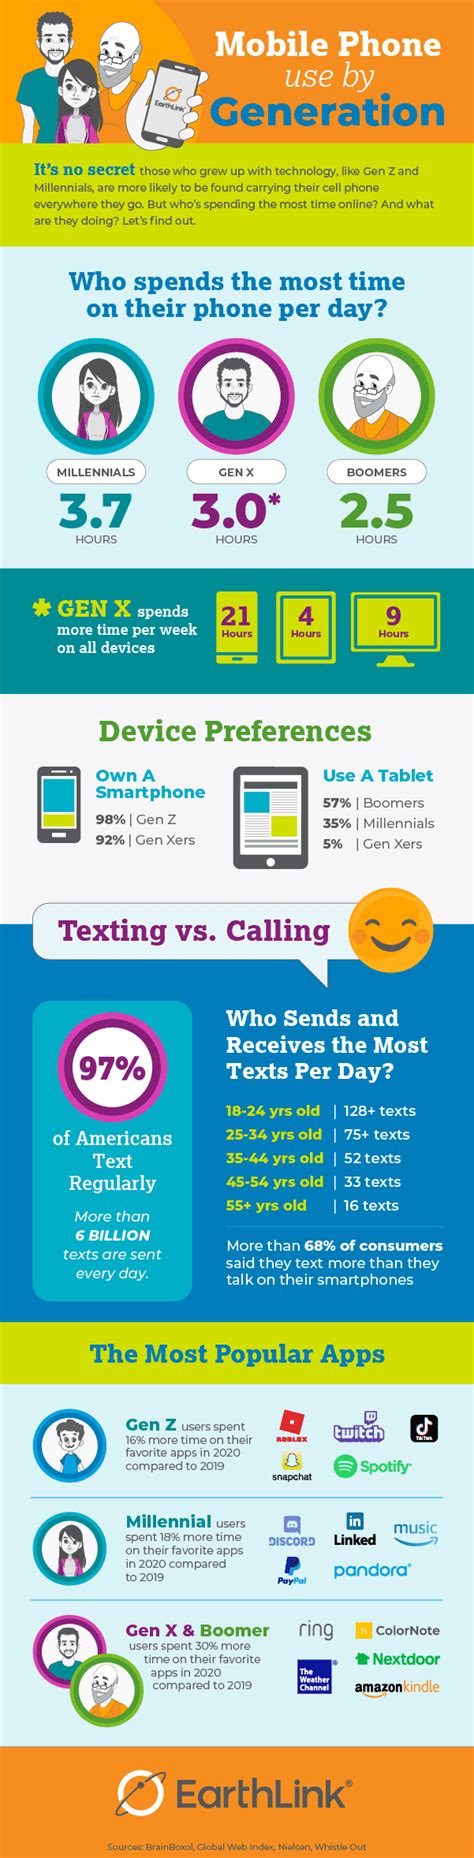 Infographic Mobile Phone Usage By Generation Earthlink